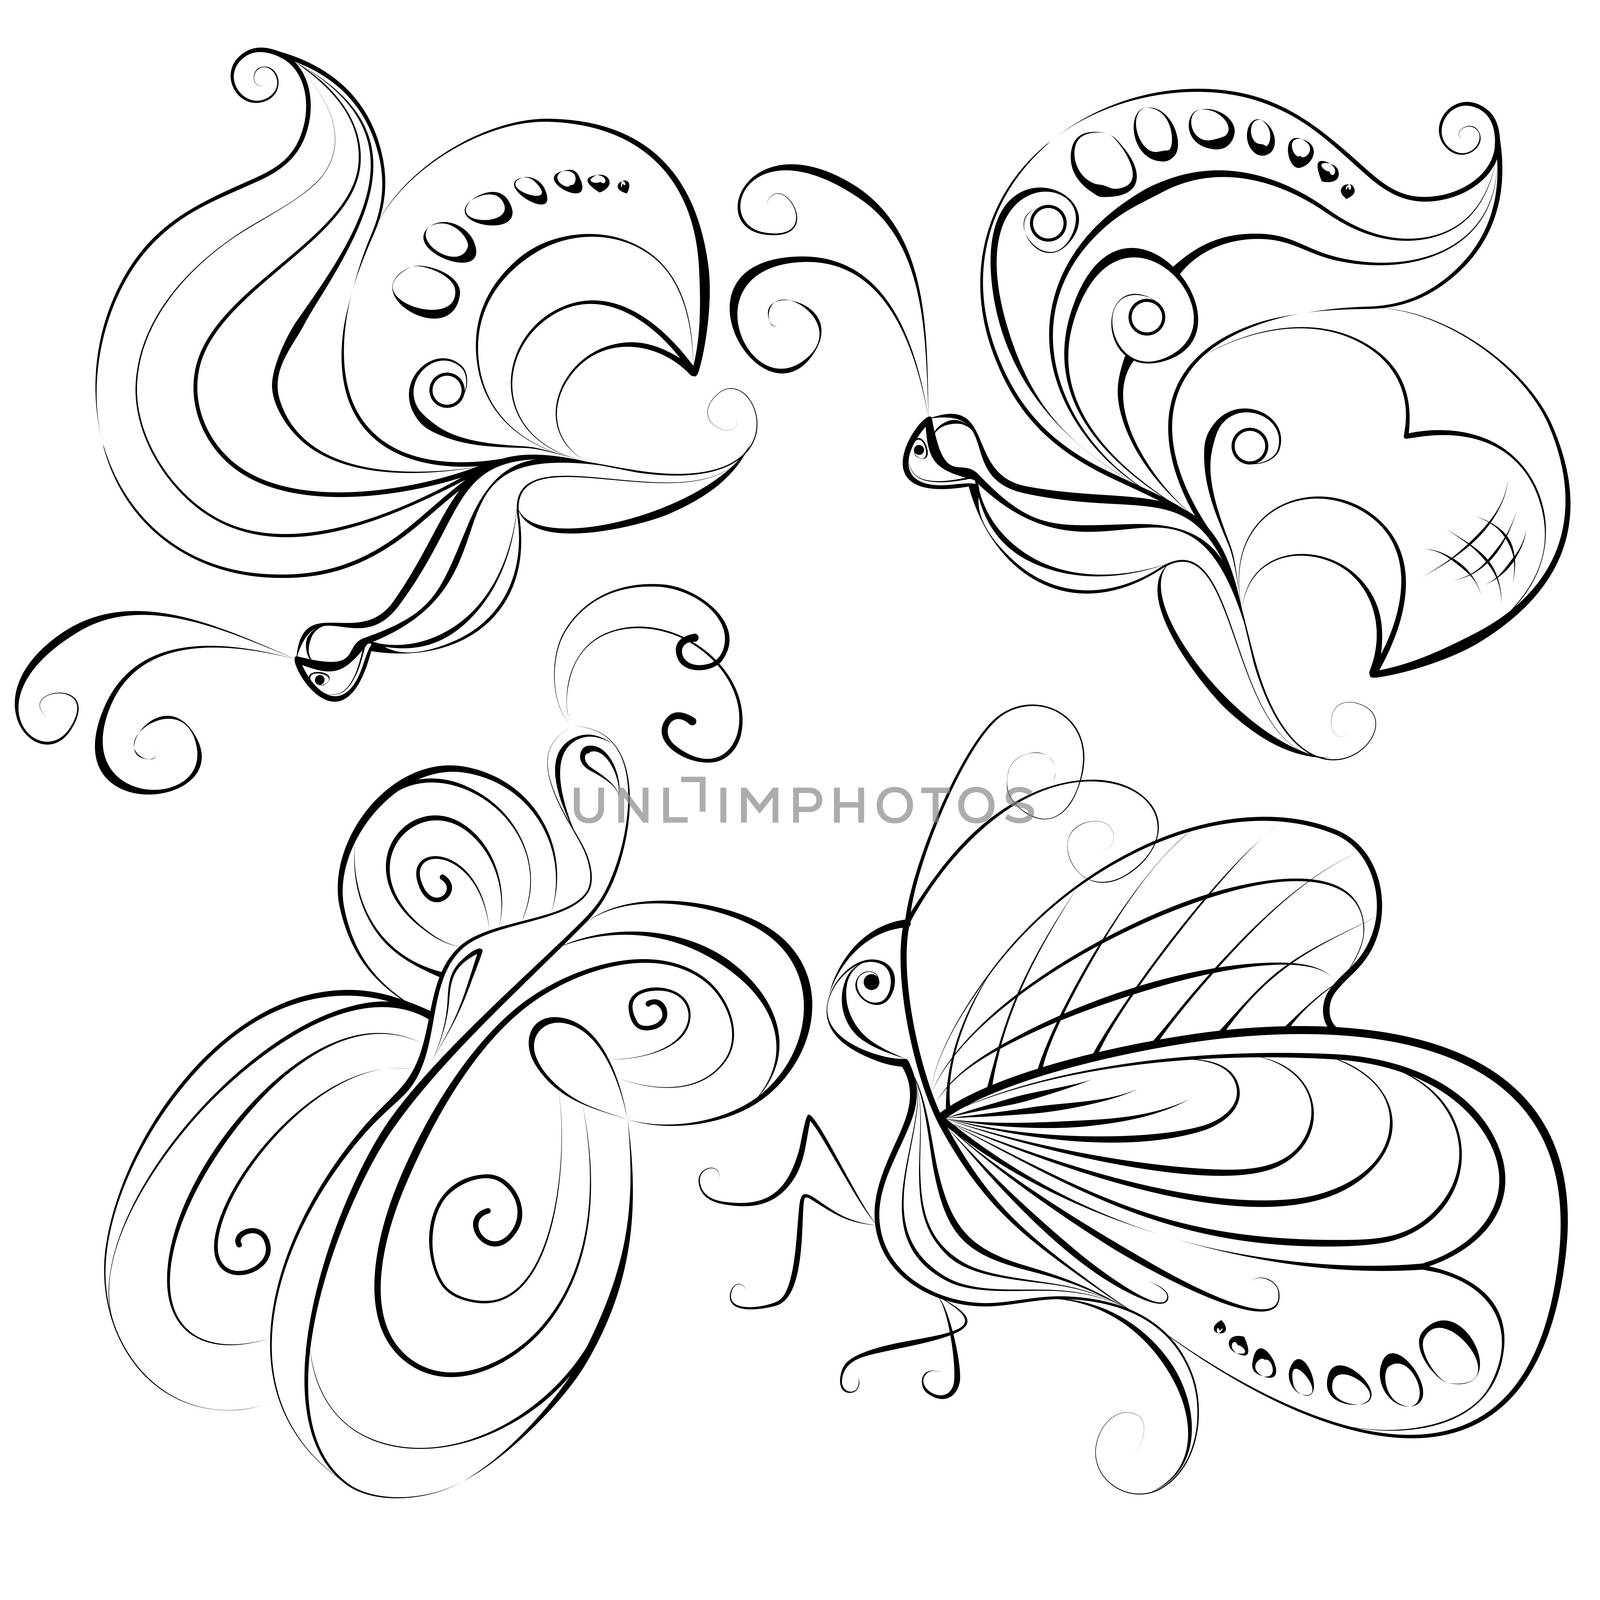 Illustration - four different butterflies without a fill color on a white background